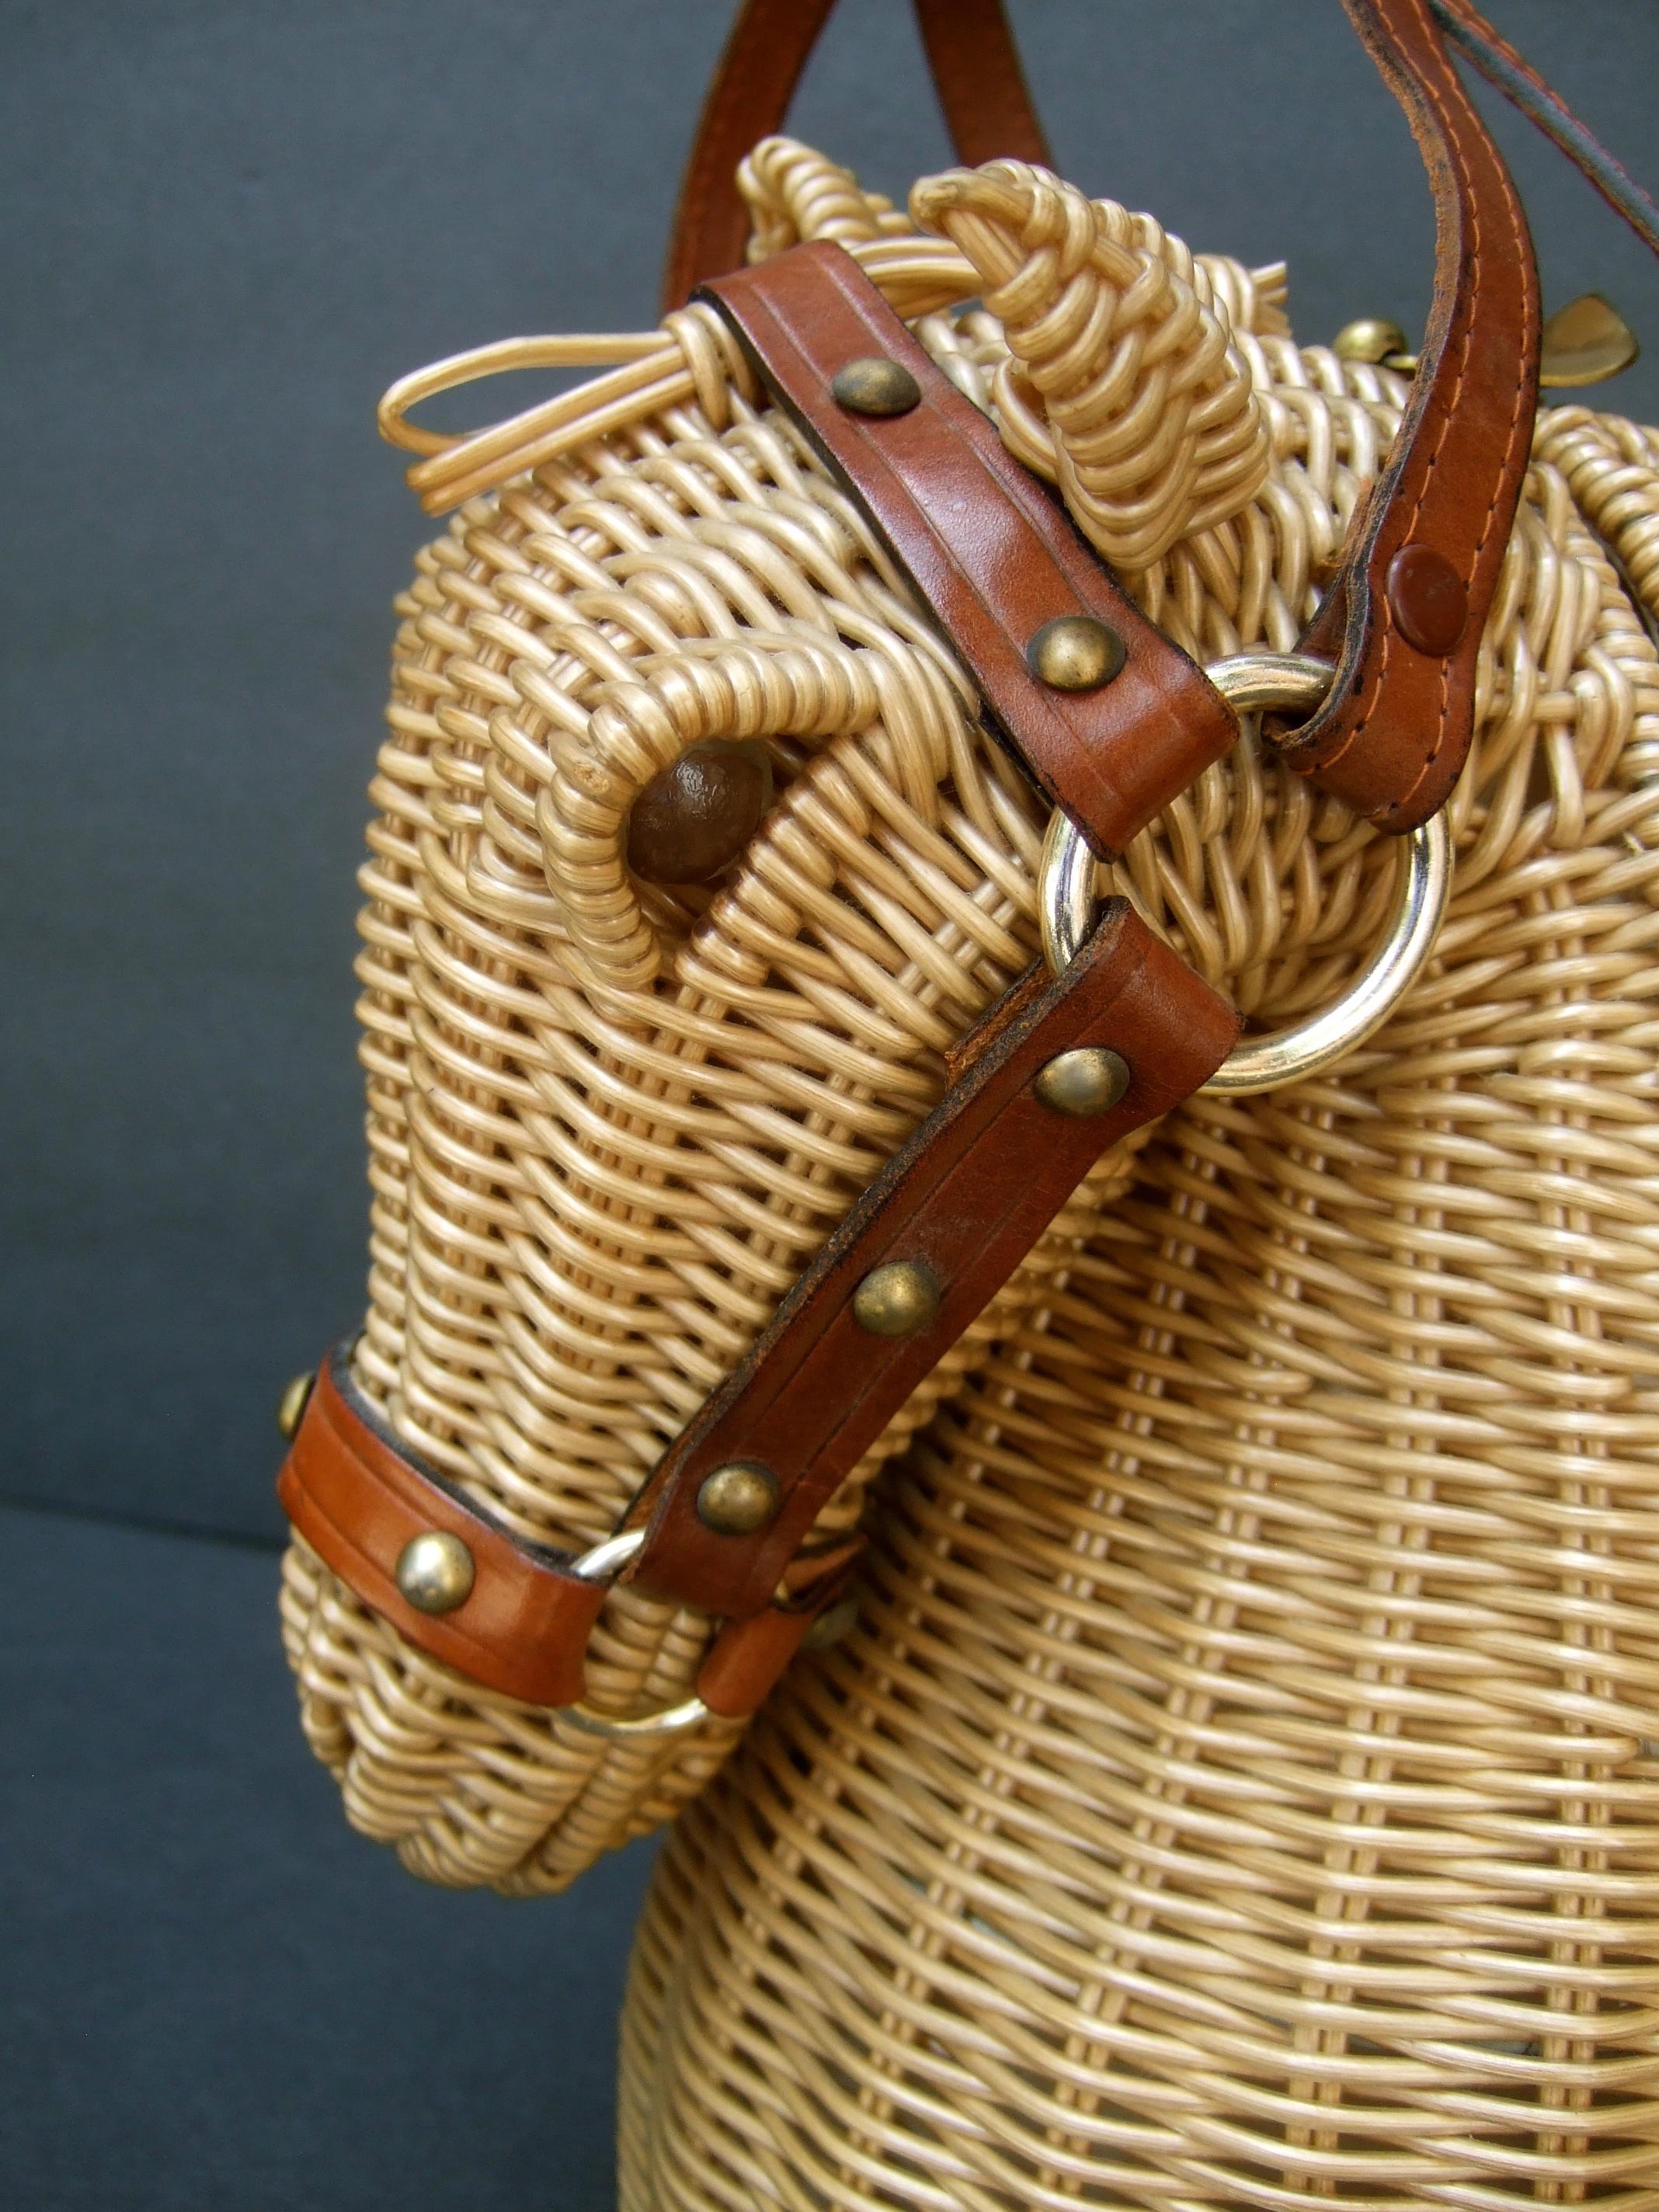 Extremely Rare Wicker Rattan Equine Handbag Designed by Marcus Brothers c 1970 3